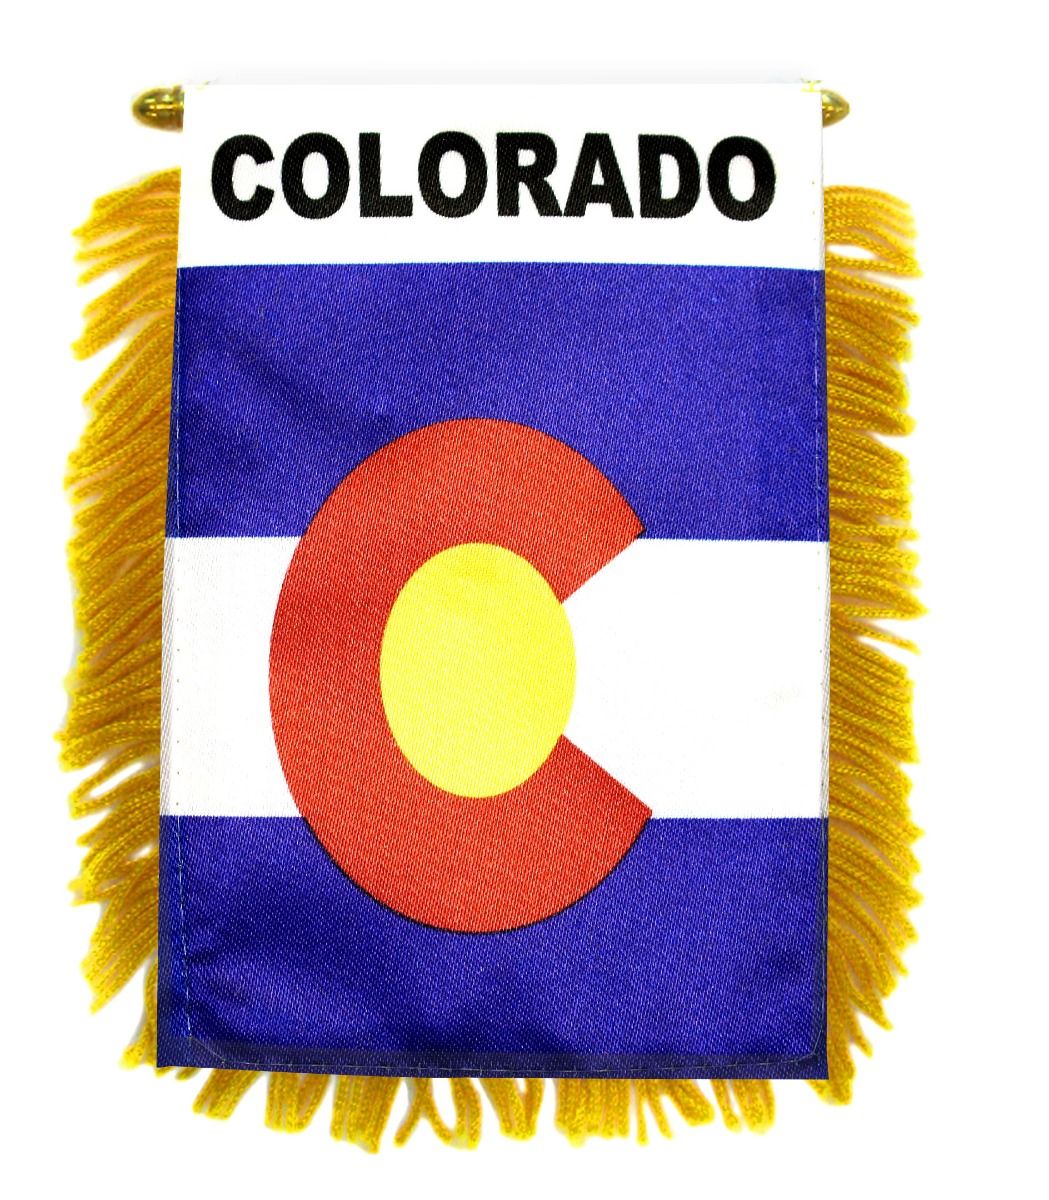 "DON'T TREAD ON ME COLORADO" flag 3x5 ft poly CO 